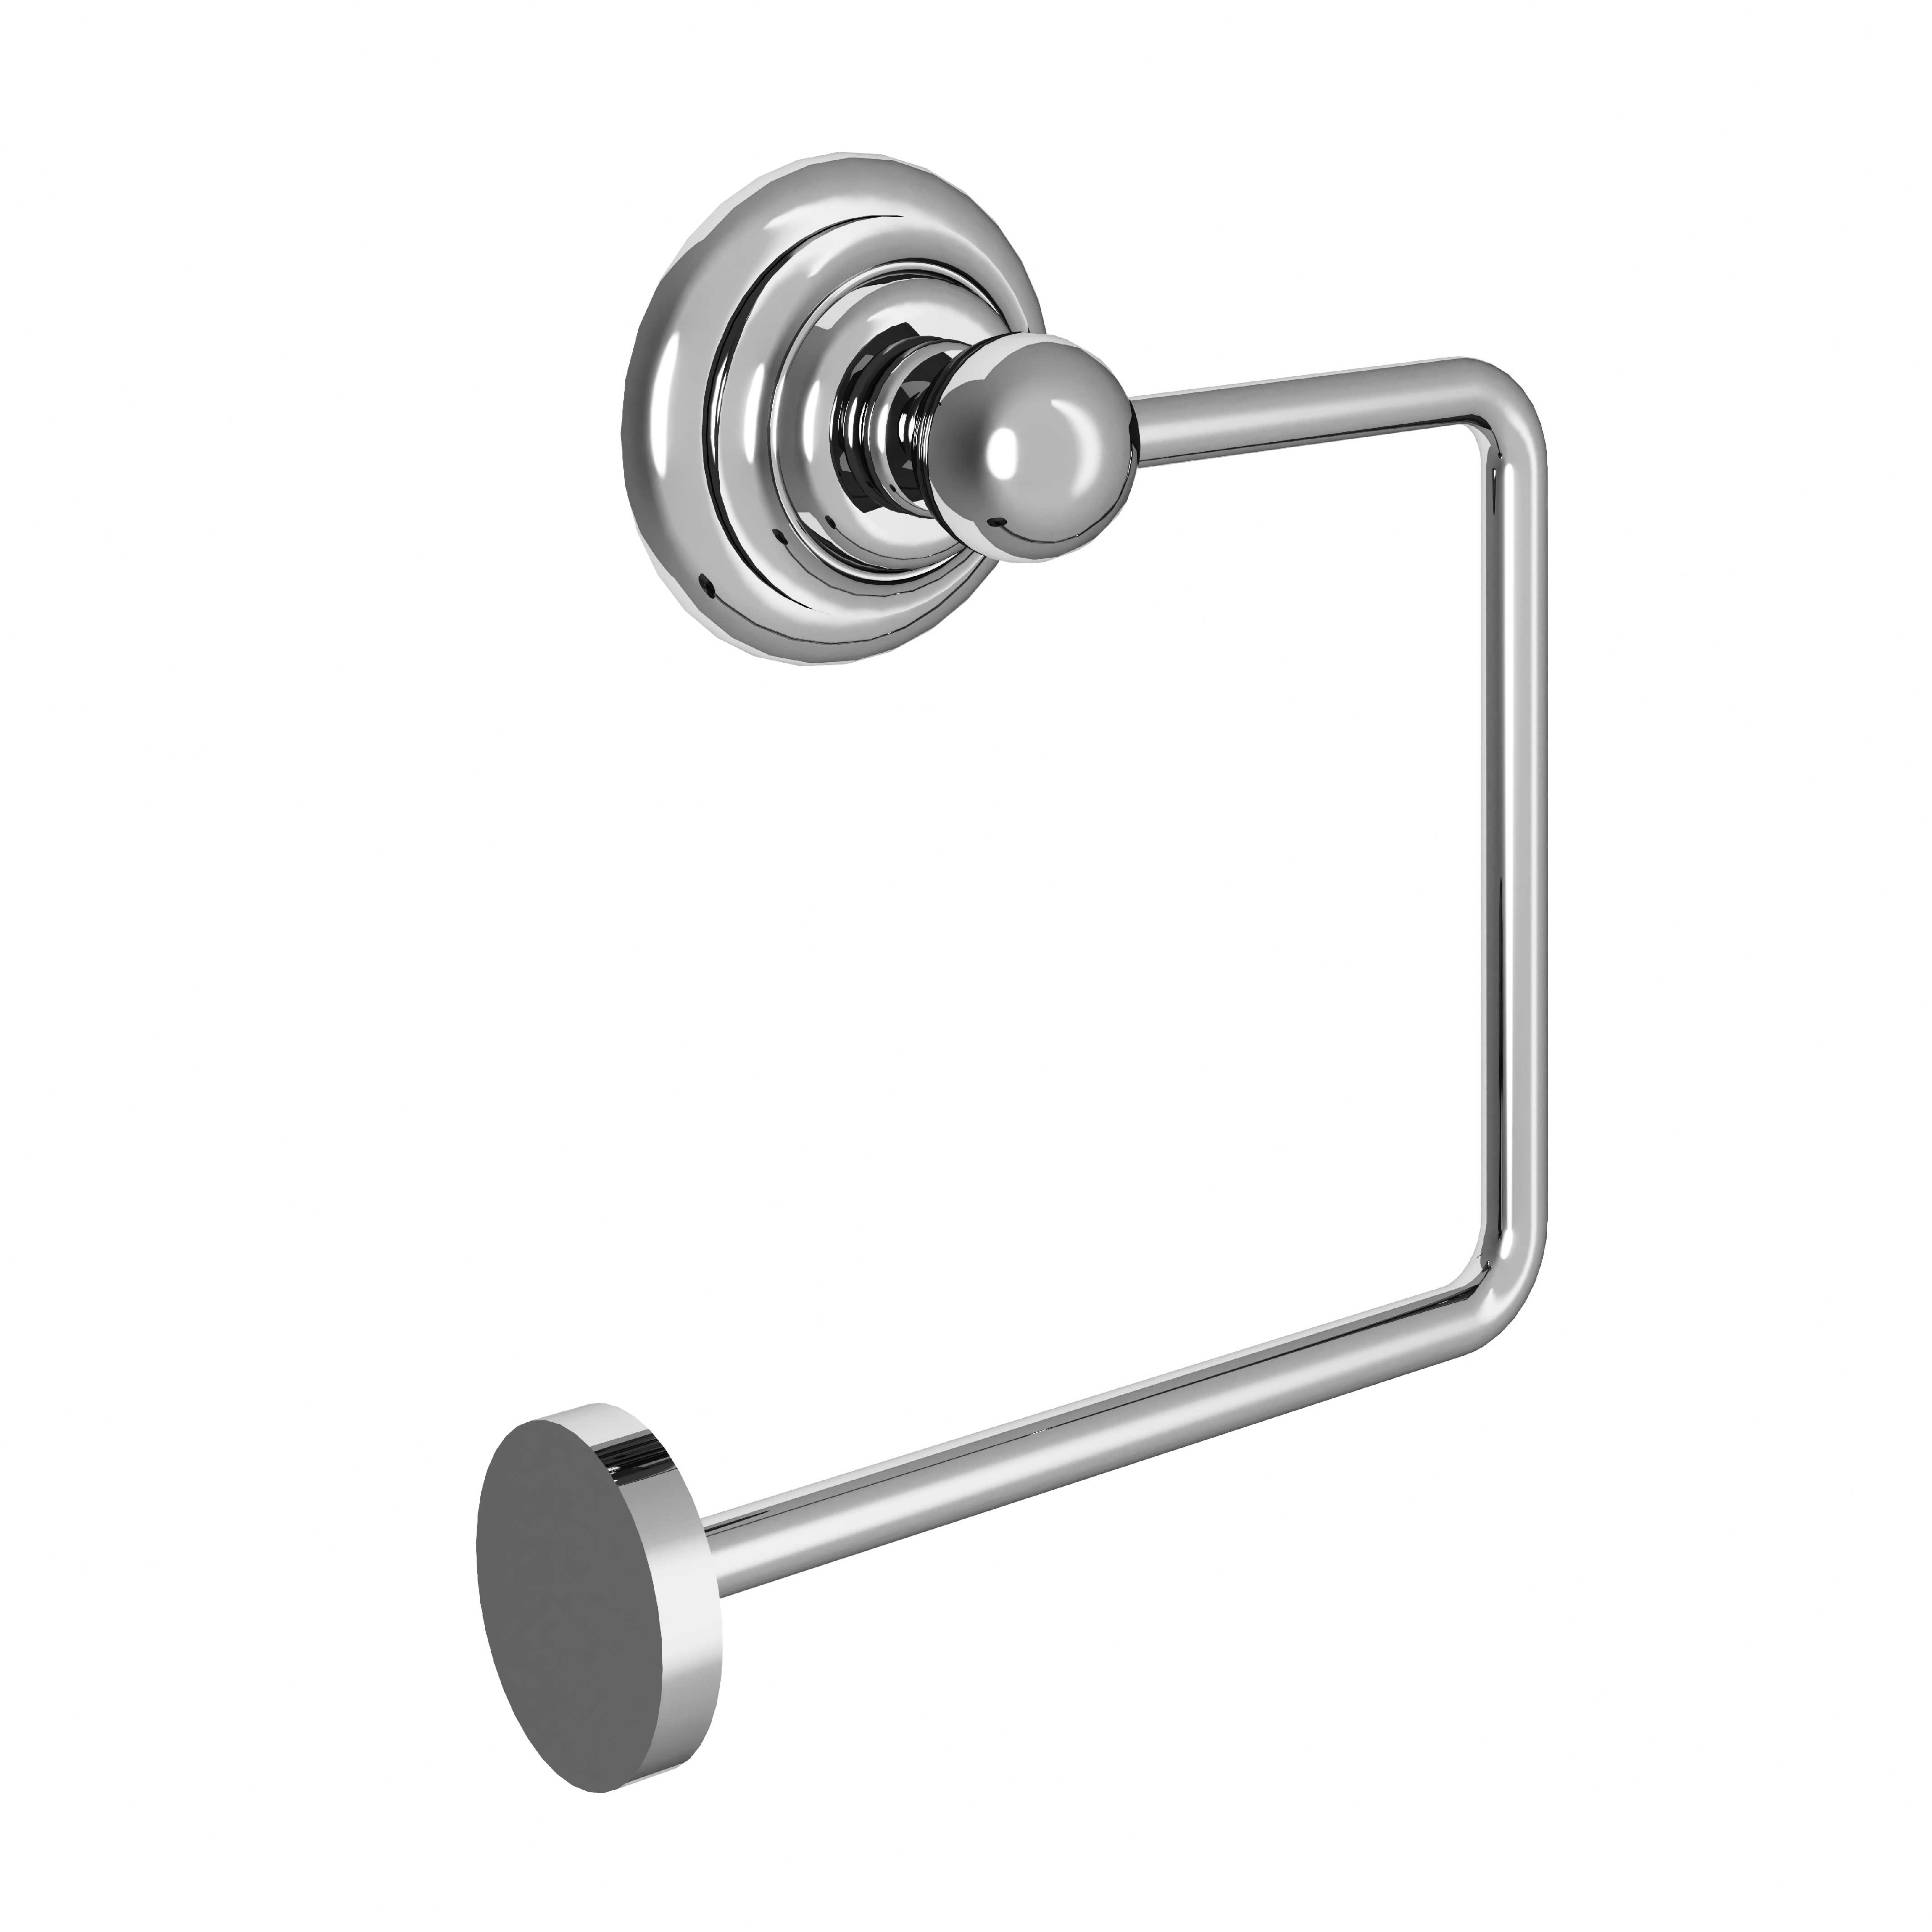 M20-504 Toilet roll holder without cover